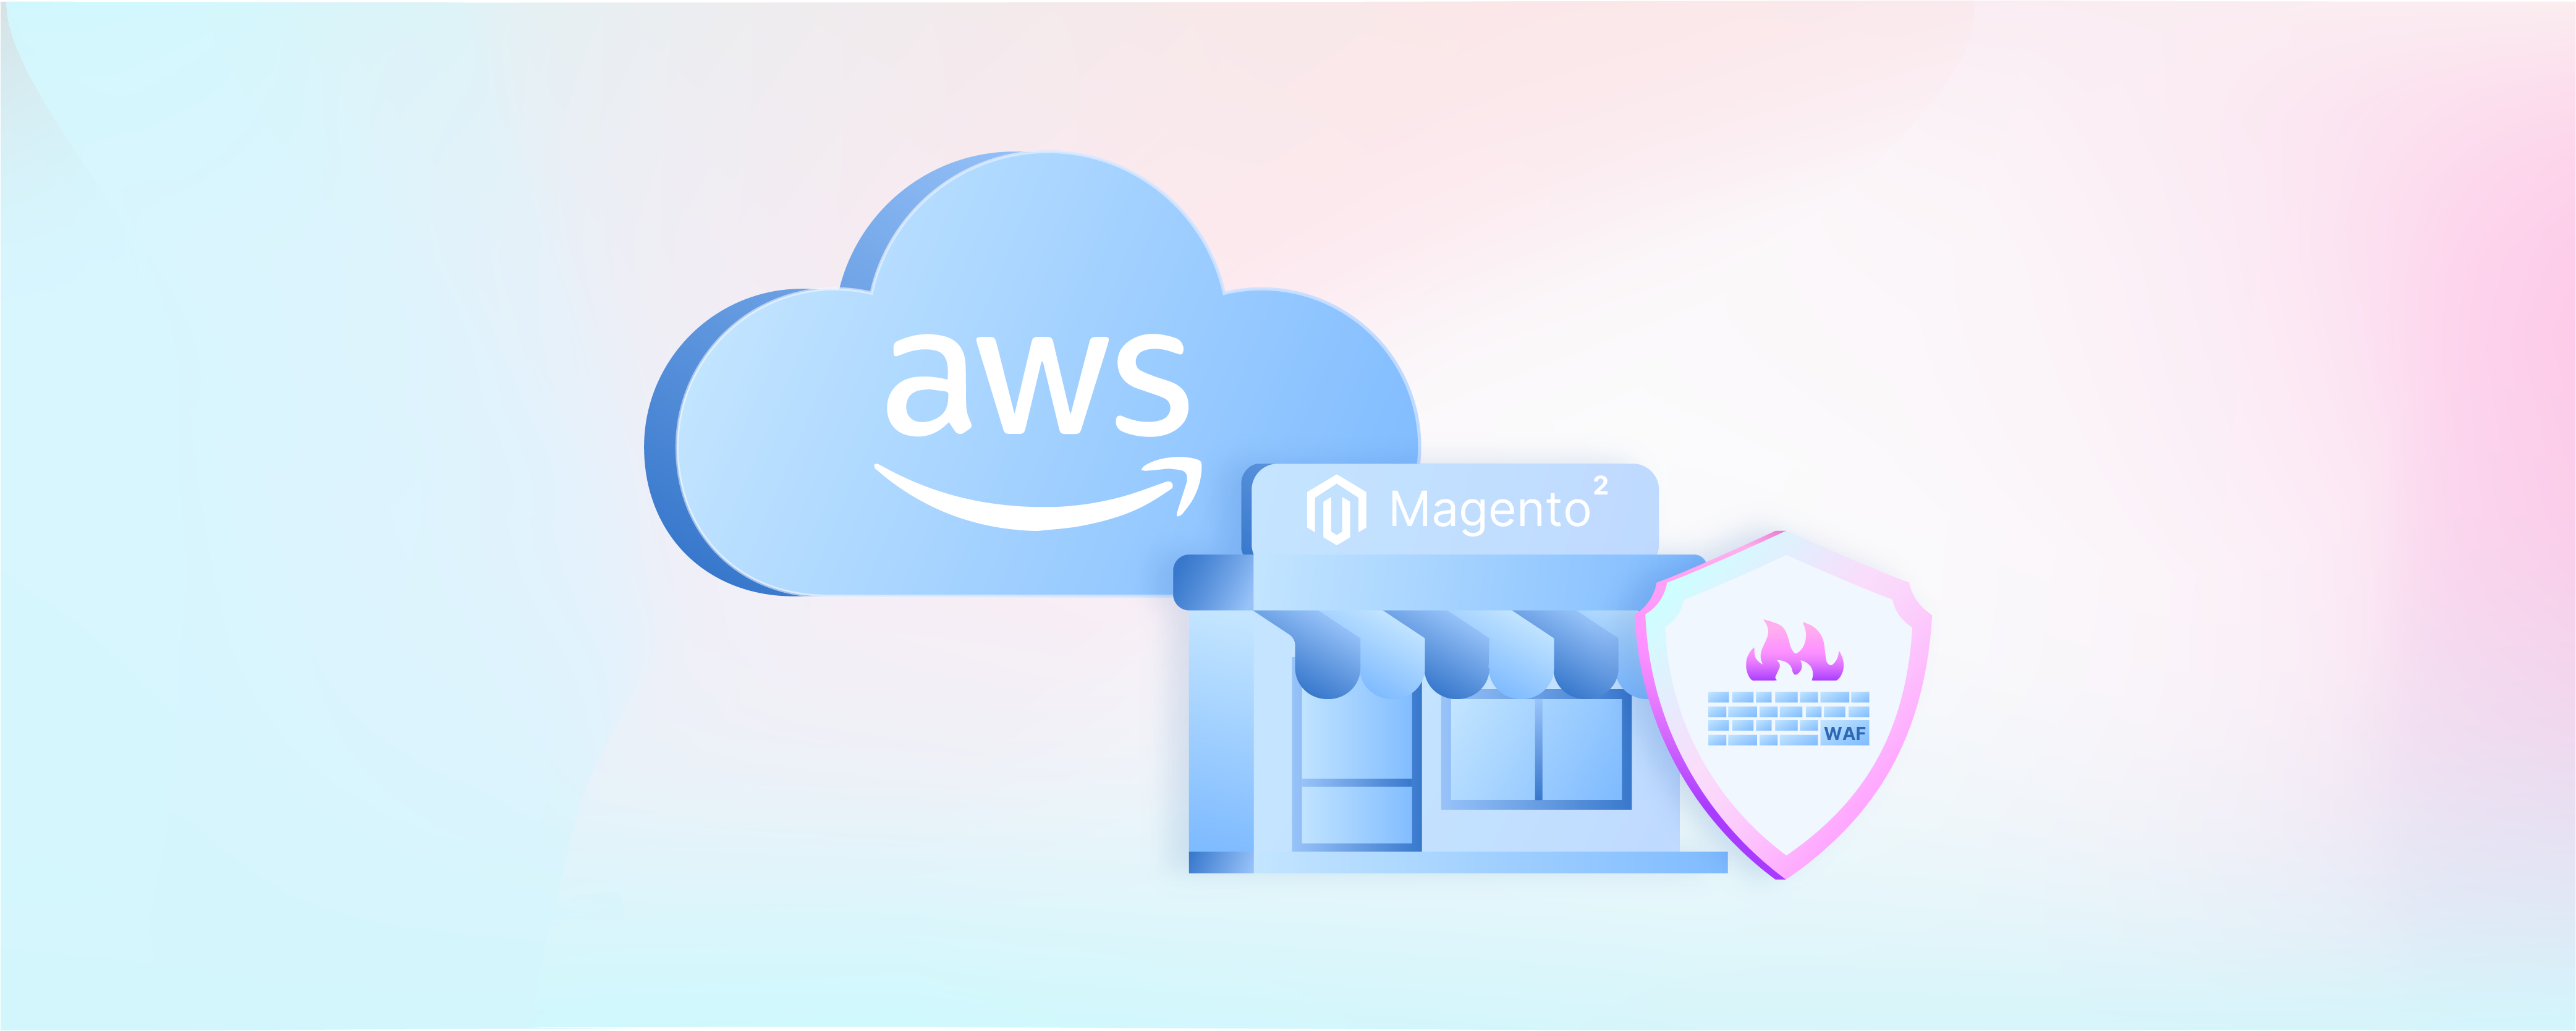 AWS WAF Magento: Configuration and Best Practices